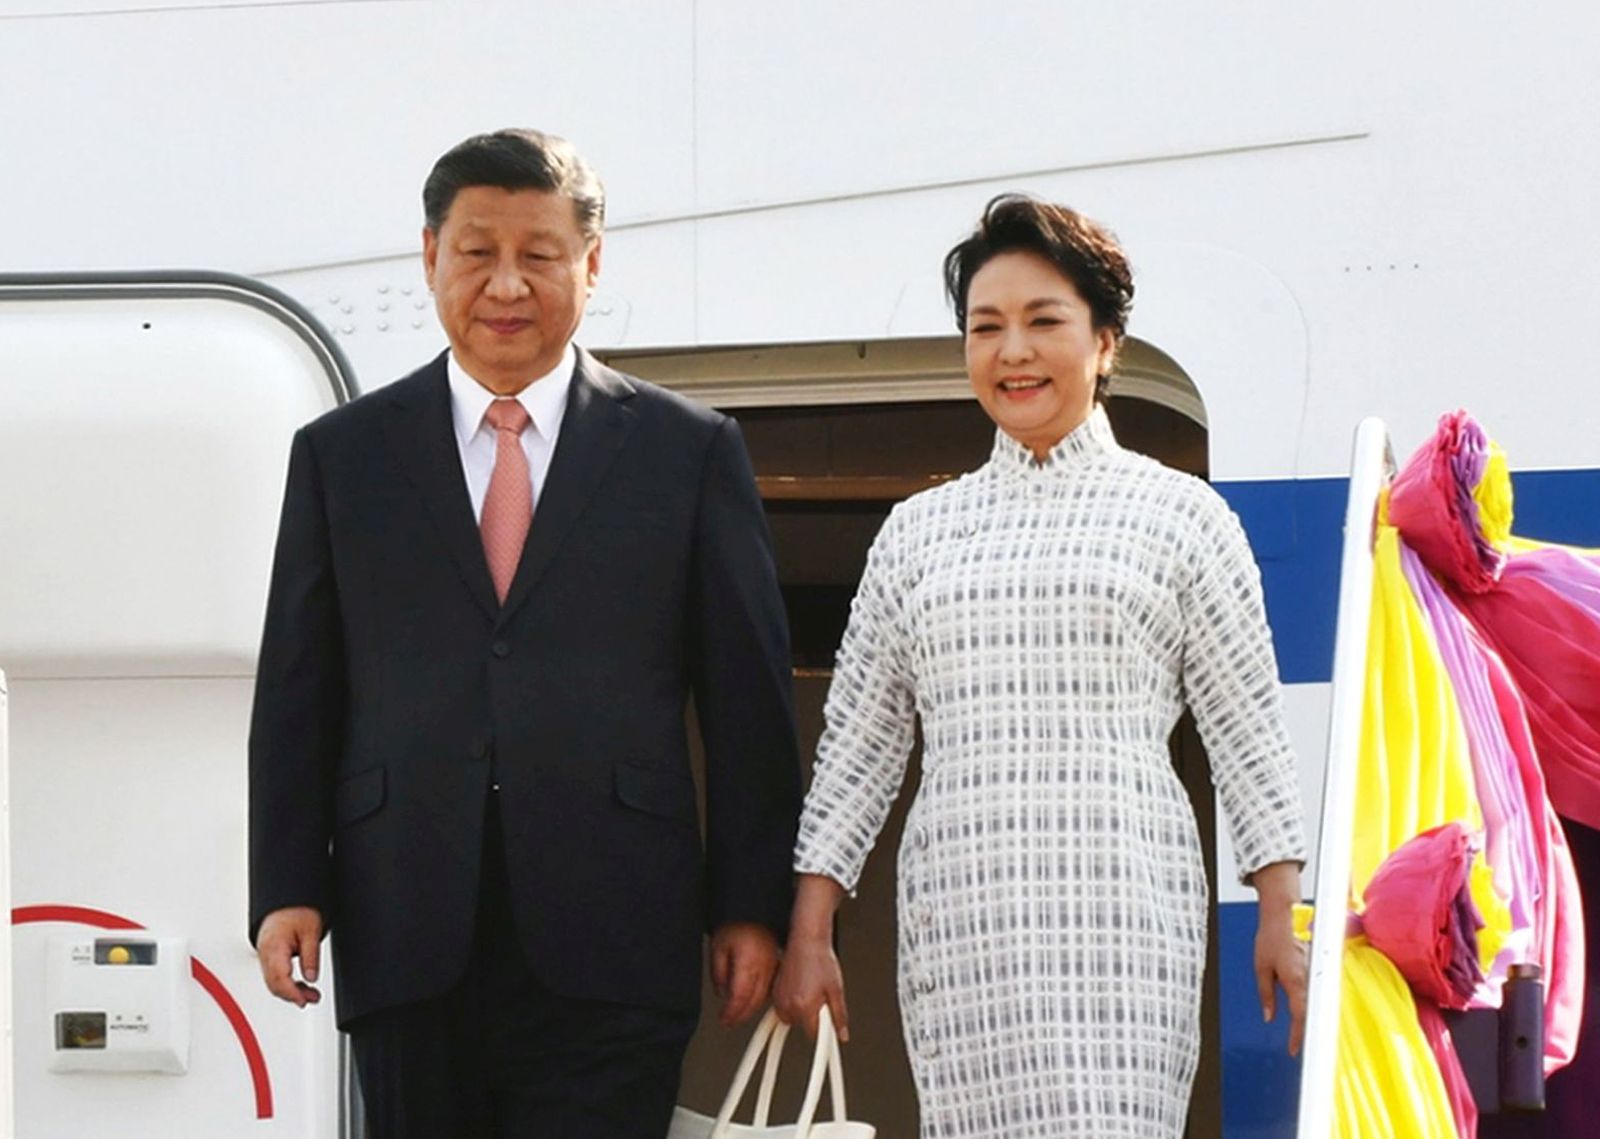 epa10309962 A handout photo made available by the Royal Thai Government shows Chinese President Xi Jinping (L) and his wife Peng Liyuan as they arrive at Bangkok airport to attend the Asia-Pacific Economic Cooperation (APEC) summit in Bangkok, Thailand, 17 November 2022. The APEC Economic Leaders' Meeting will be held from 18 to 19 November 2022 in Bangkok.  EPA/THE ROYAL THAI GOVERNMENT HANDOUT HANDOUT EDITORIAL USE ONLY/NO SALES HANDOUT EDITORIAL USE ONLY/NO SALES